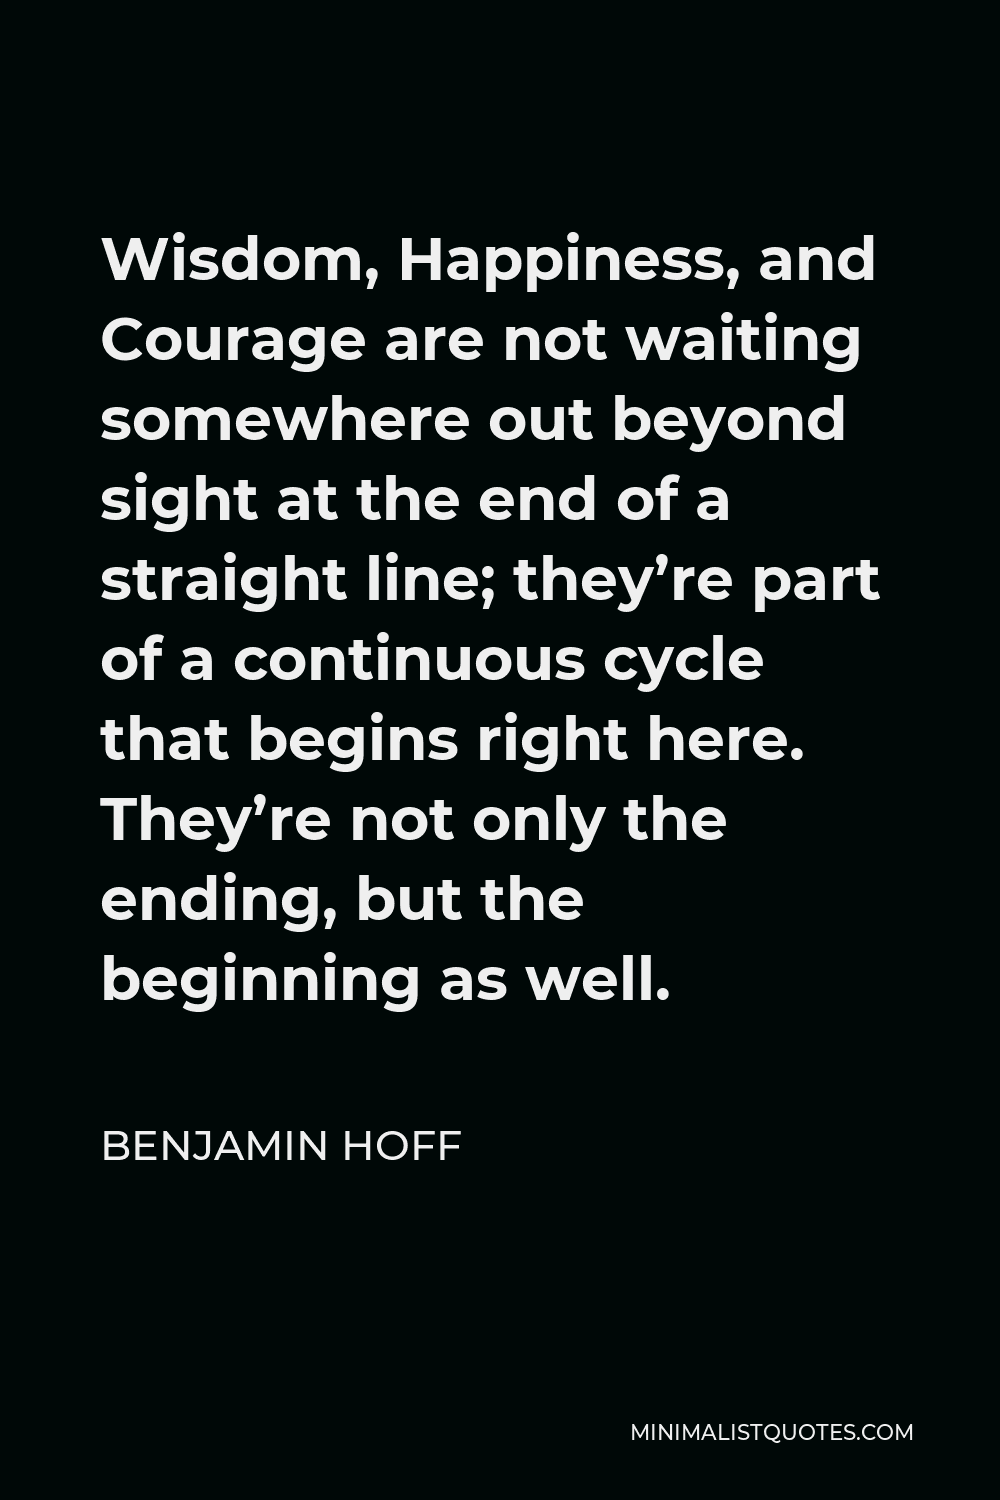 Benjamin Hoff Quote - Wisdom, Happiness, and Courage are not waiting somewhere out beyond sight at the end of a straight line; they’re part of a continuous cycle that begins right here. They’re not only the ending, but the beginning as well.